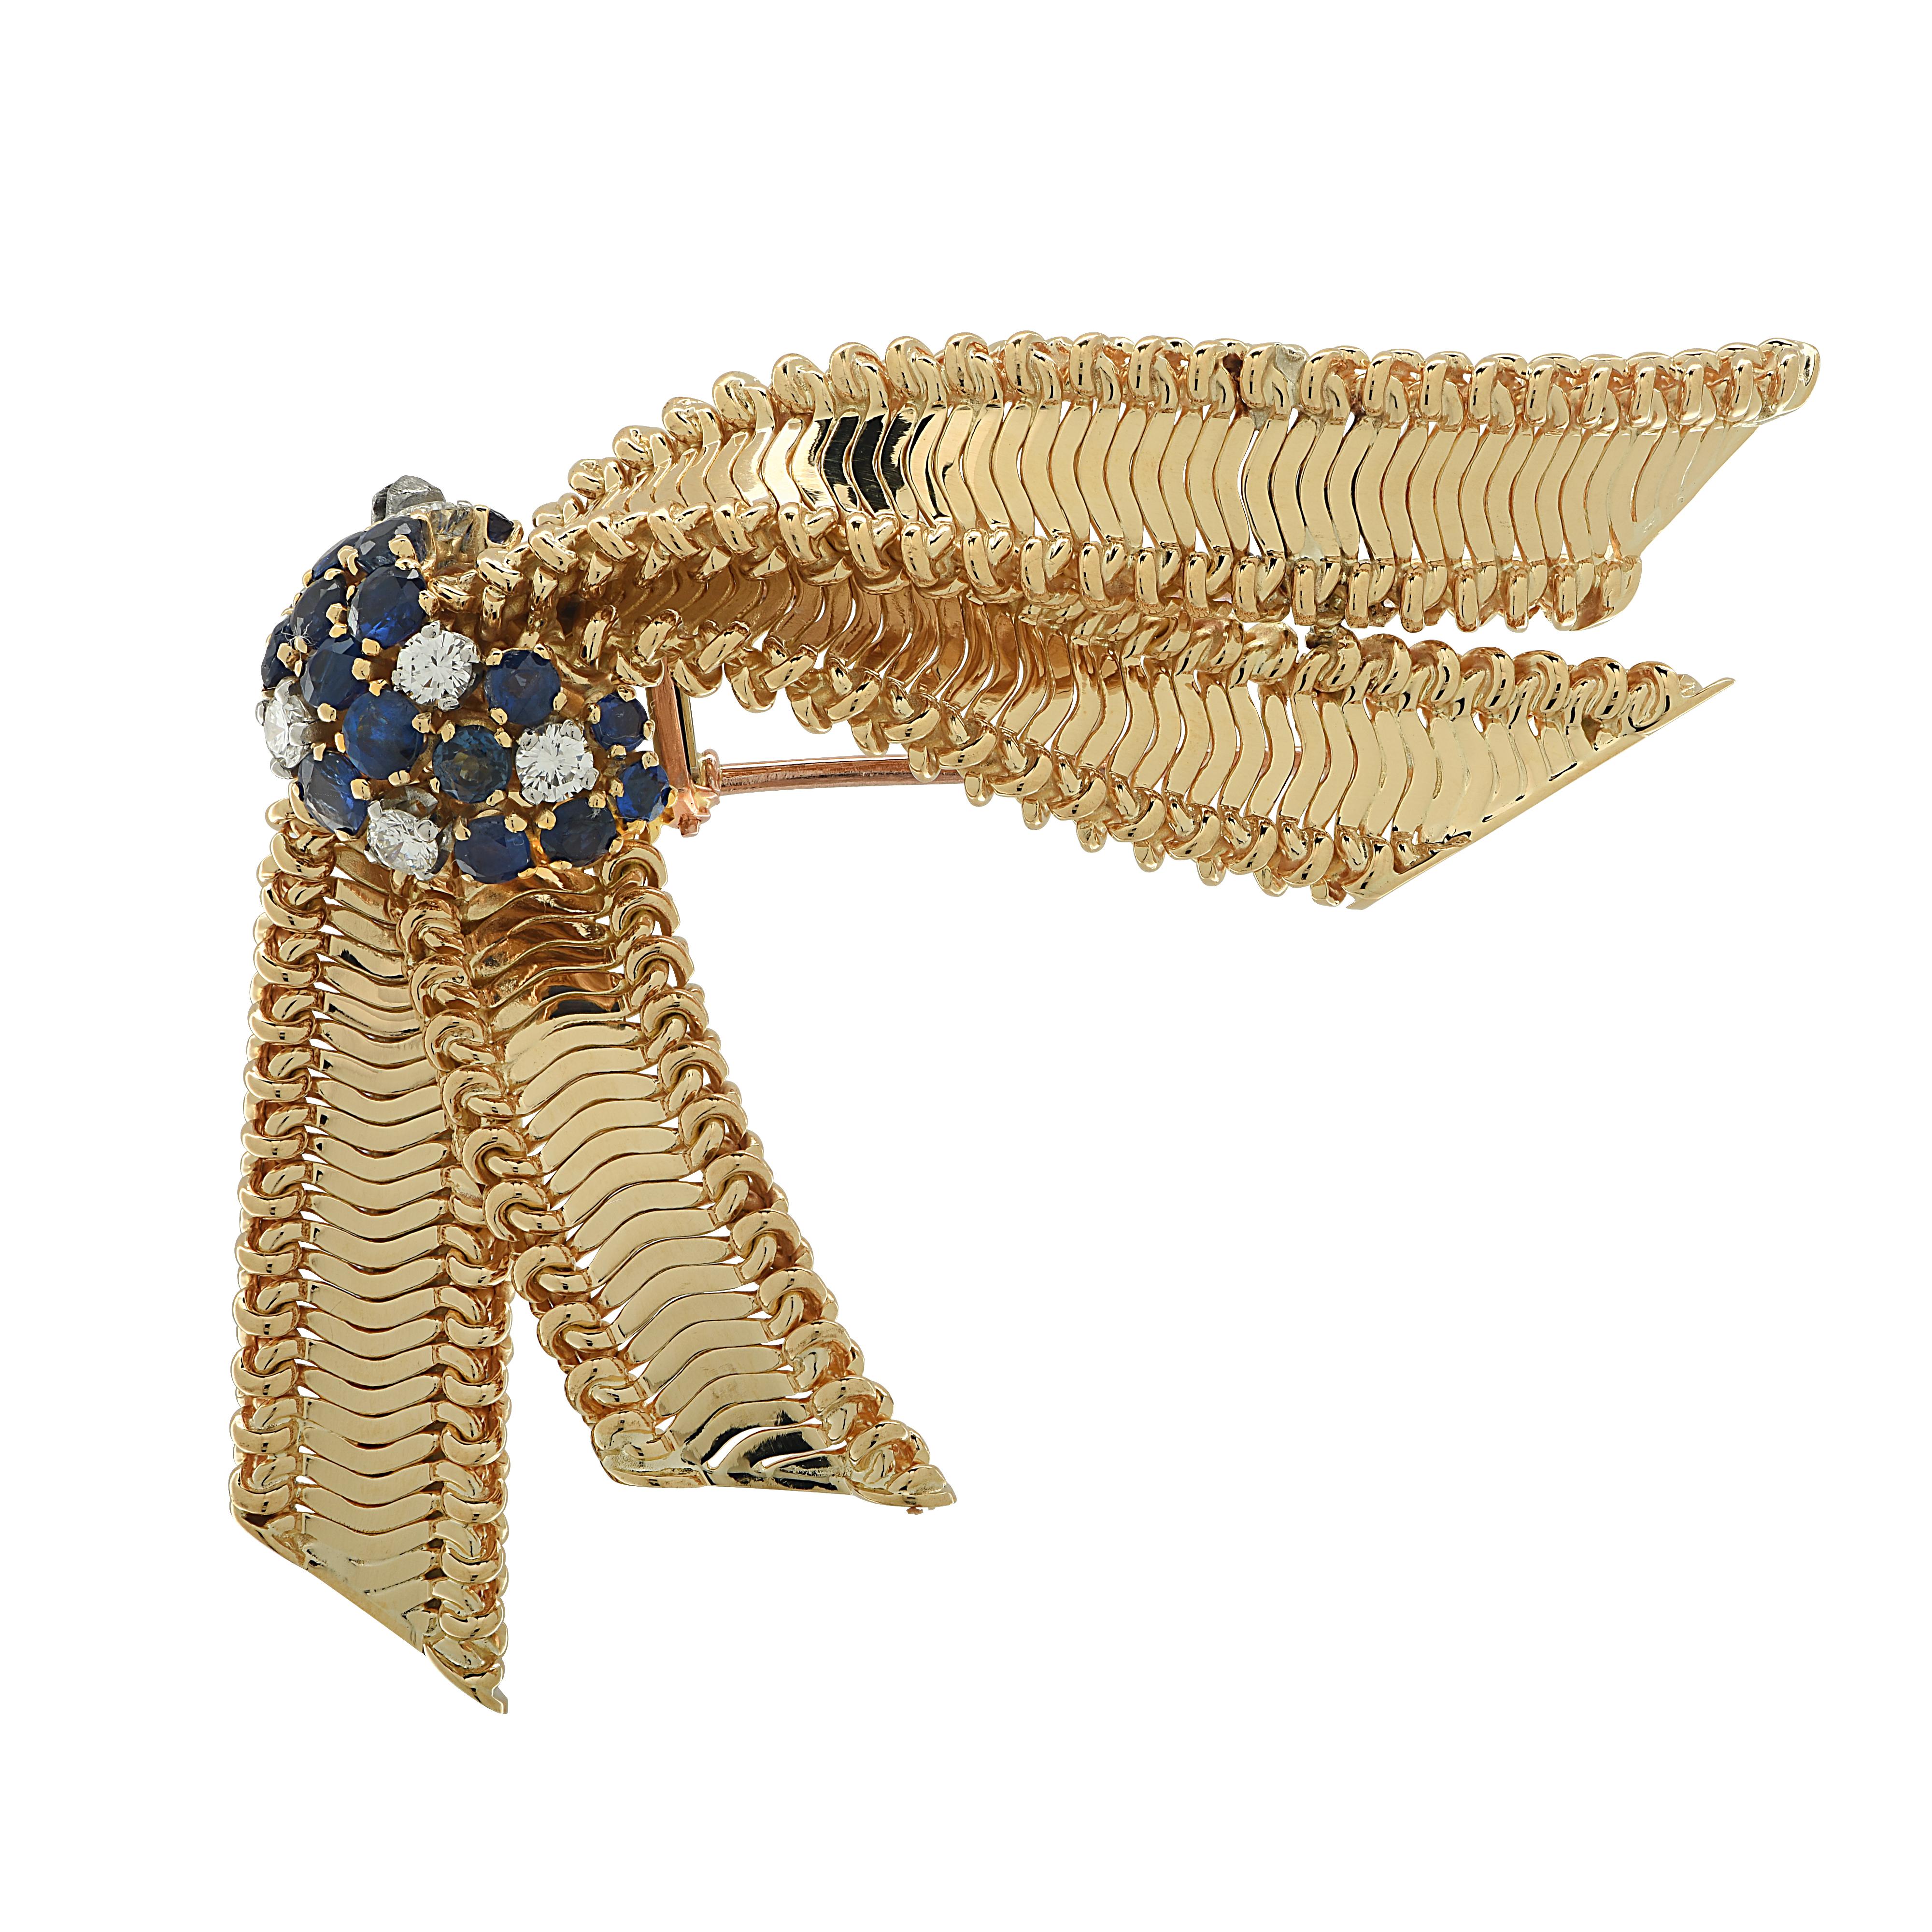 Enchanting brooch pin crafted in 18 karat yellow gold, featuring 6 round brilliant cut diamonds weighing approximately .50 carats total, G color, VS-SI clarity and 17 round blue sapphires weighing approximately 1 carat total. This delightful brooch